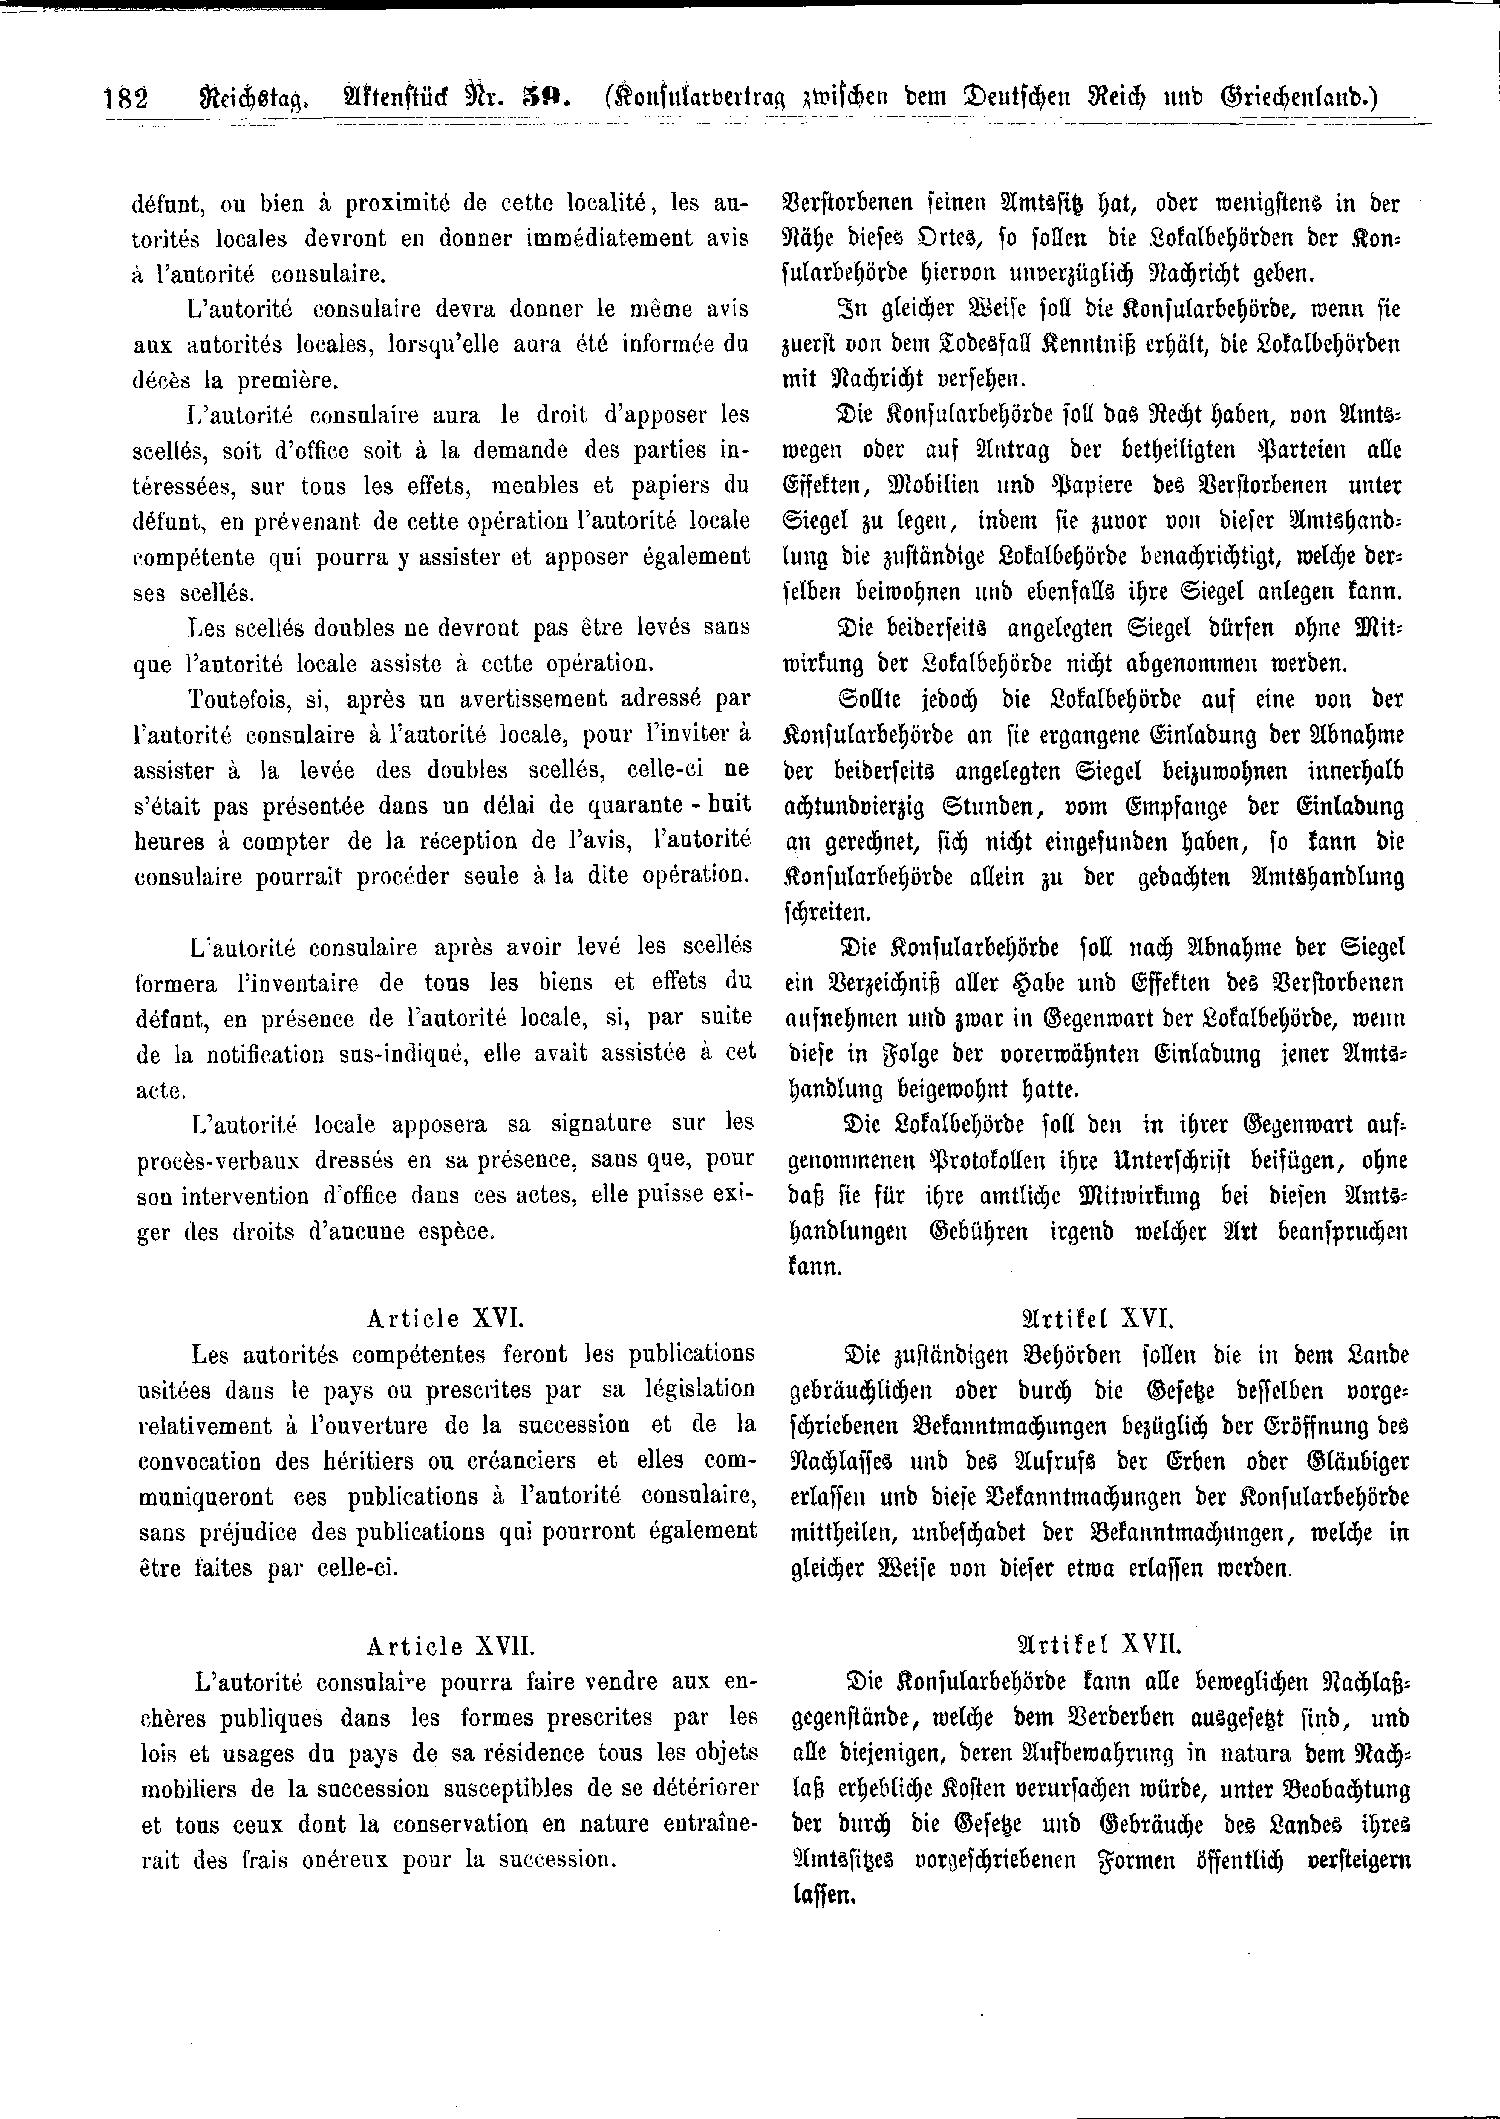 Scan of page 182